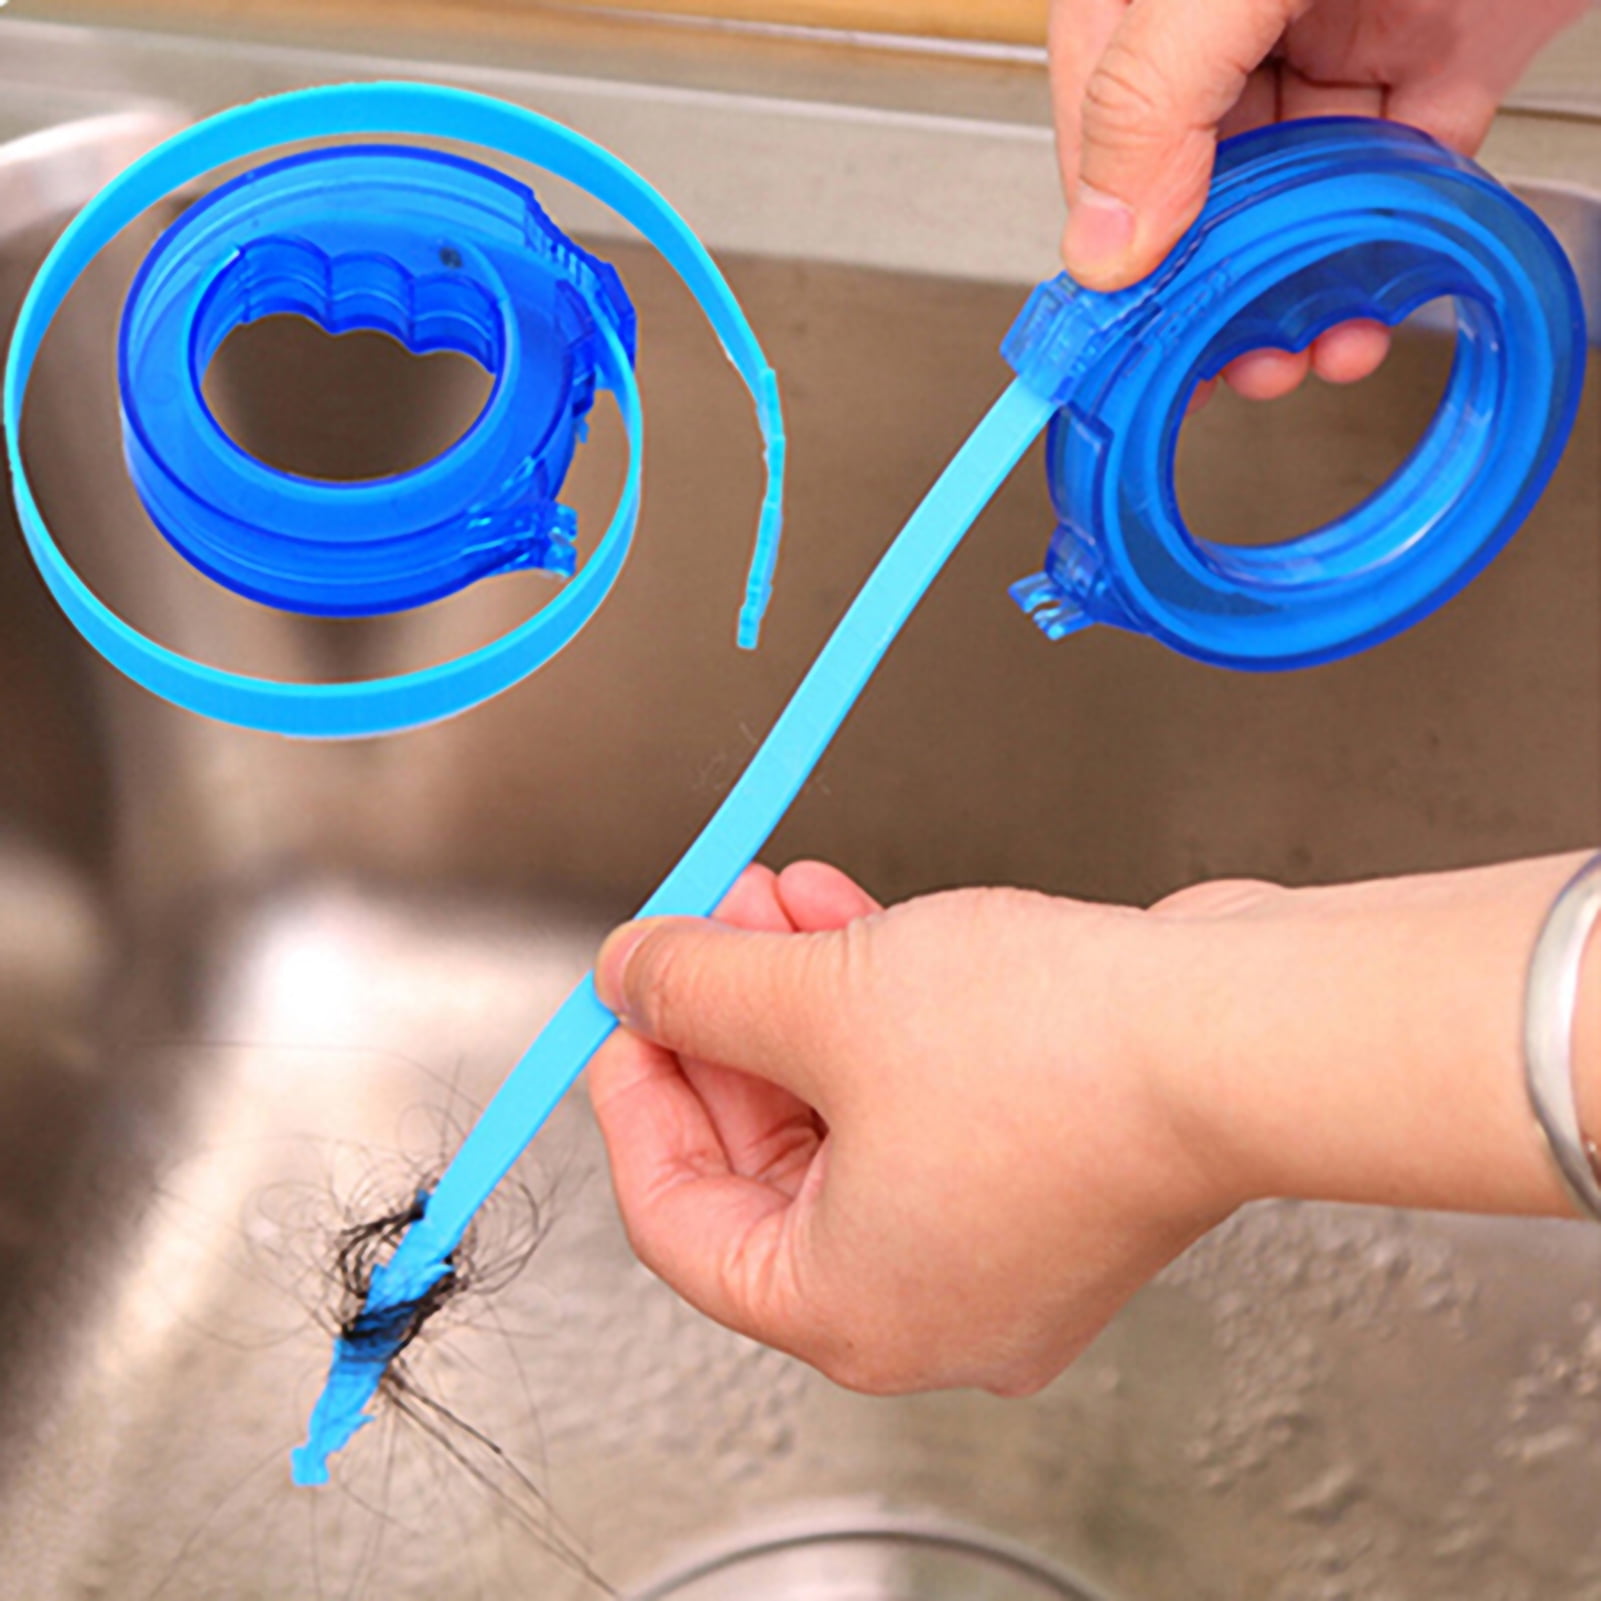 Sink Wizard™ Drain Clog Removal Tool - As Seen On TV Tech